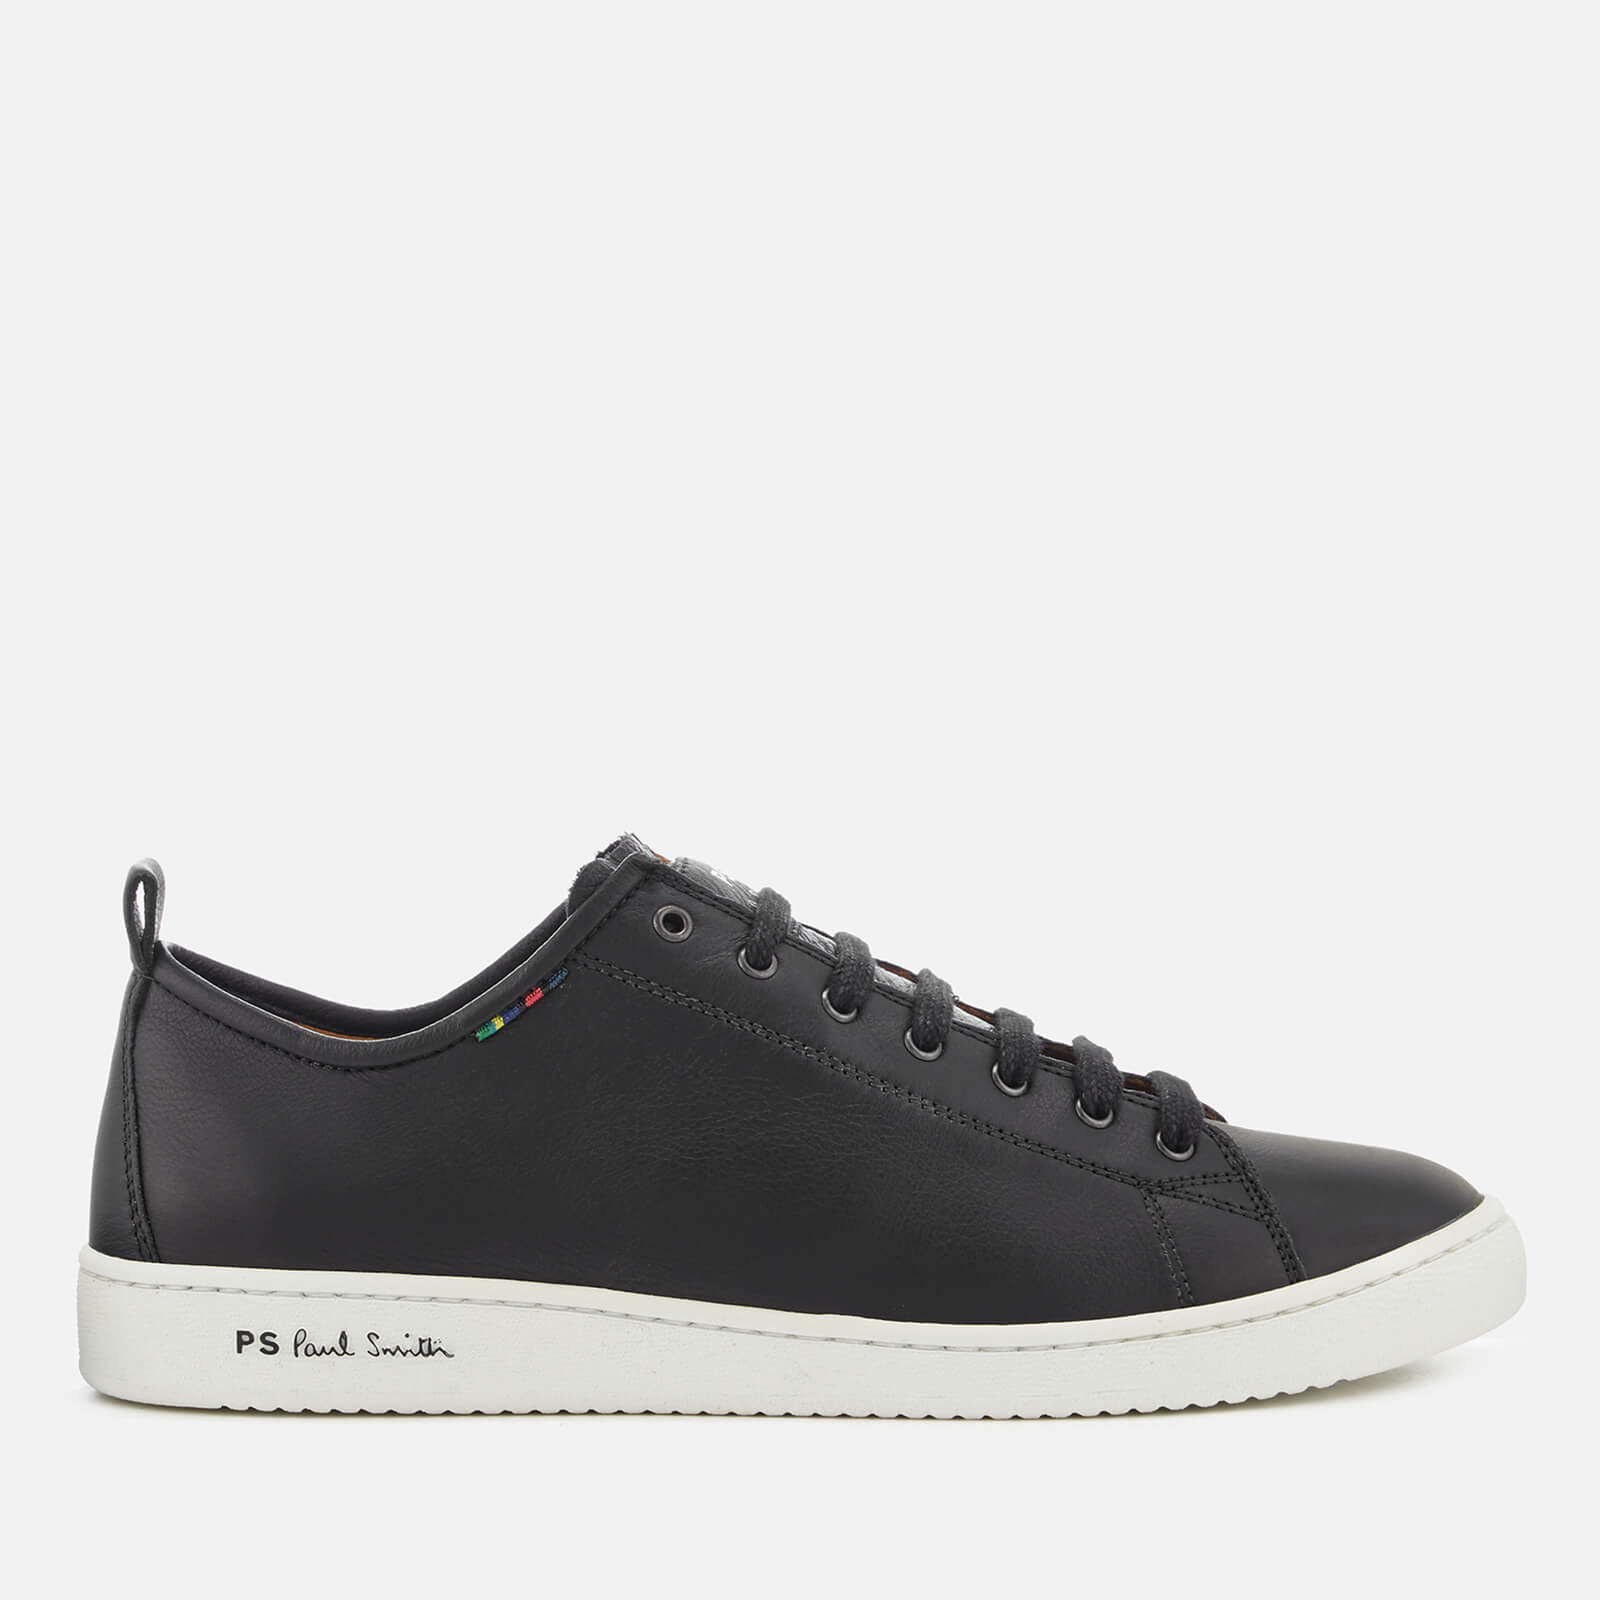 PS Paul Smith Men's Miyata Leather Low Top Trainers - Black - UK 7